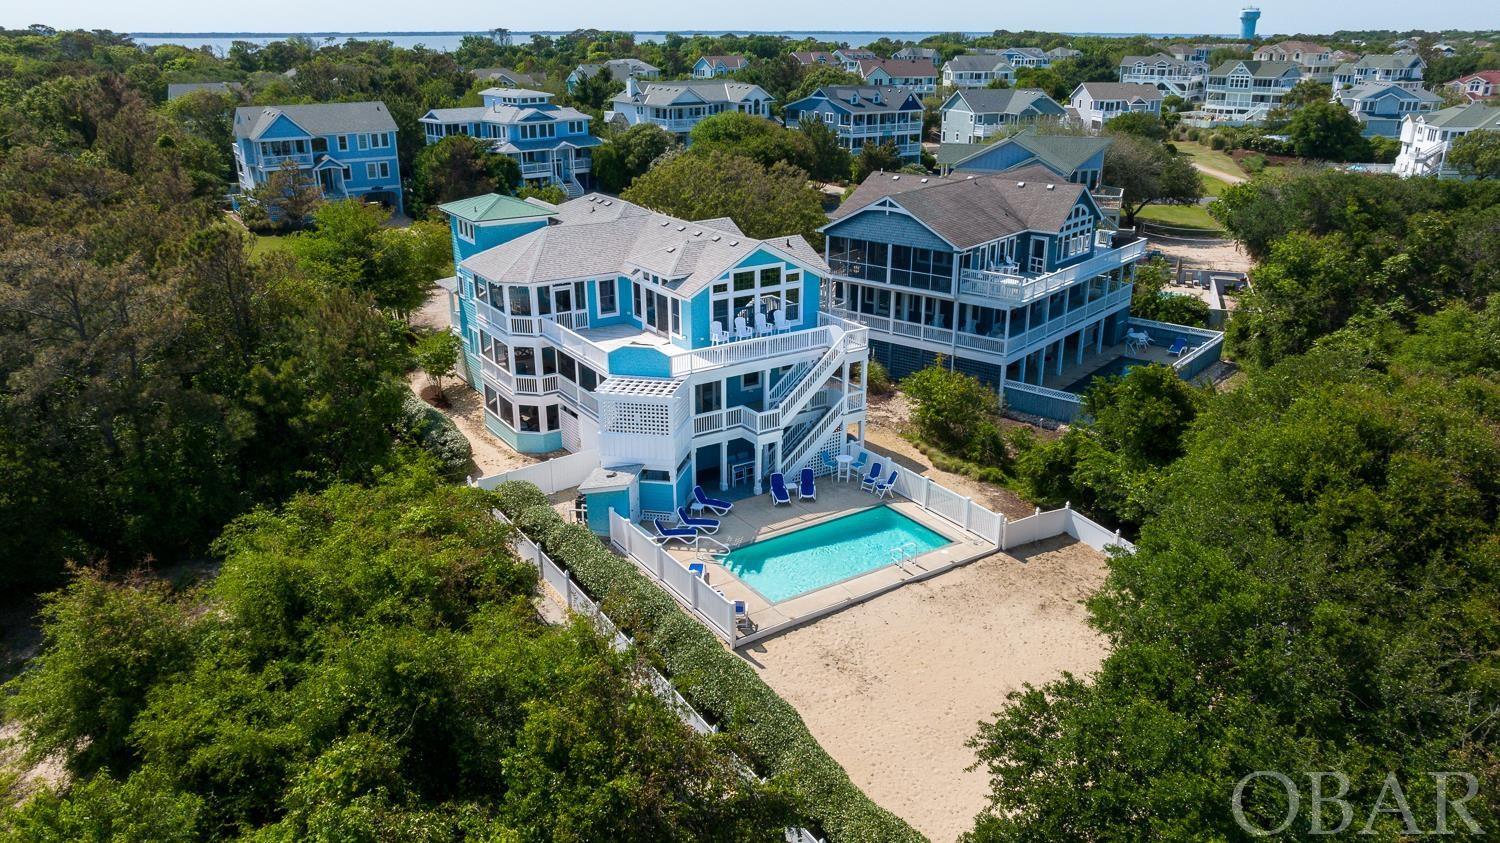 Stunning coastal retreat in the heart of Duck in the coveted Four Seasons Community. Extremely well maintained and updated, this home is full of upgrades and everything you would expect in a high end home. Located at the end of a cul-de-sac, enjoy a large (~17,000 sq ft) lot and direct beach access via the community walkway next to the house that takes you straight out to the beach! Professionally decorated with new furniture throughout, a remodeled kitchen with all new GE appliances, new interior and exterior paint, new expanded fencing giving you a completely fenced in back yard, a huge storage room added under the house, new pool heater for the large 14' x 28' salt water pool, and more! This 6 bedroom home is comfortable and welcoming, a smart rental investment or second home, complete with a private elevator to take you to each level and even handicap friendly amenities throughout. Outside, enjoy spacious decks on each level, hot tub, two outdoor showers, and plenty of parking.  Being in Four Seasons, you'll appreciate all the amenities including a clubhouse with indoor pool and gym, tennis courts, trolley service in the summer, and oceanside community pool, and sound access with dock.